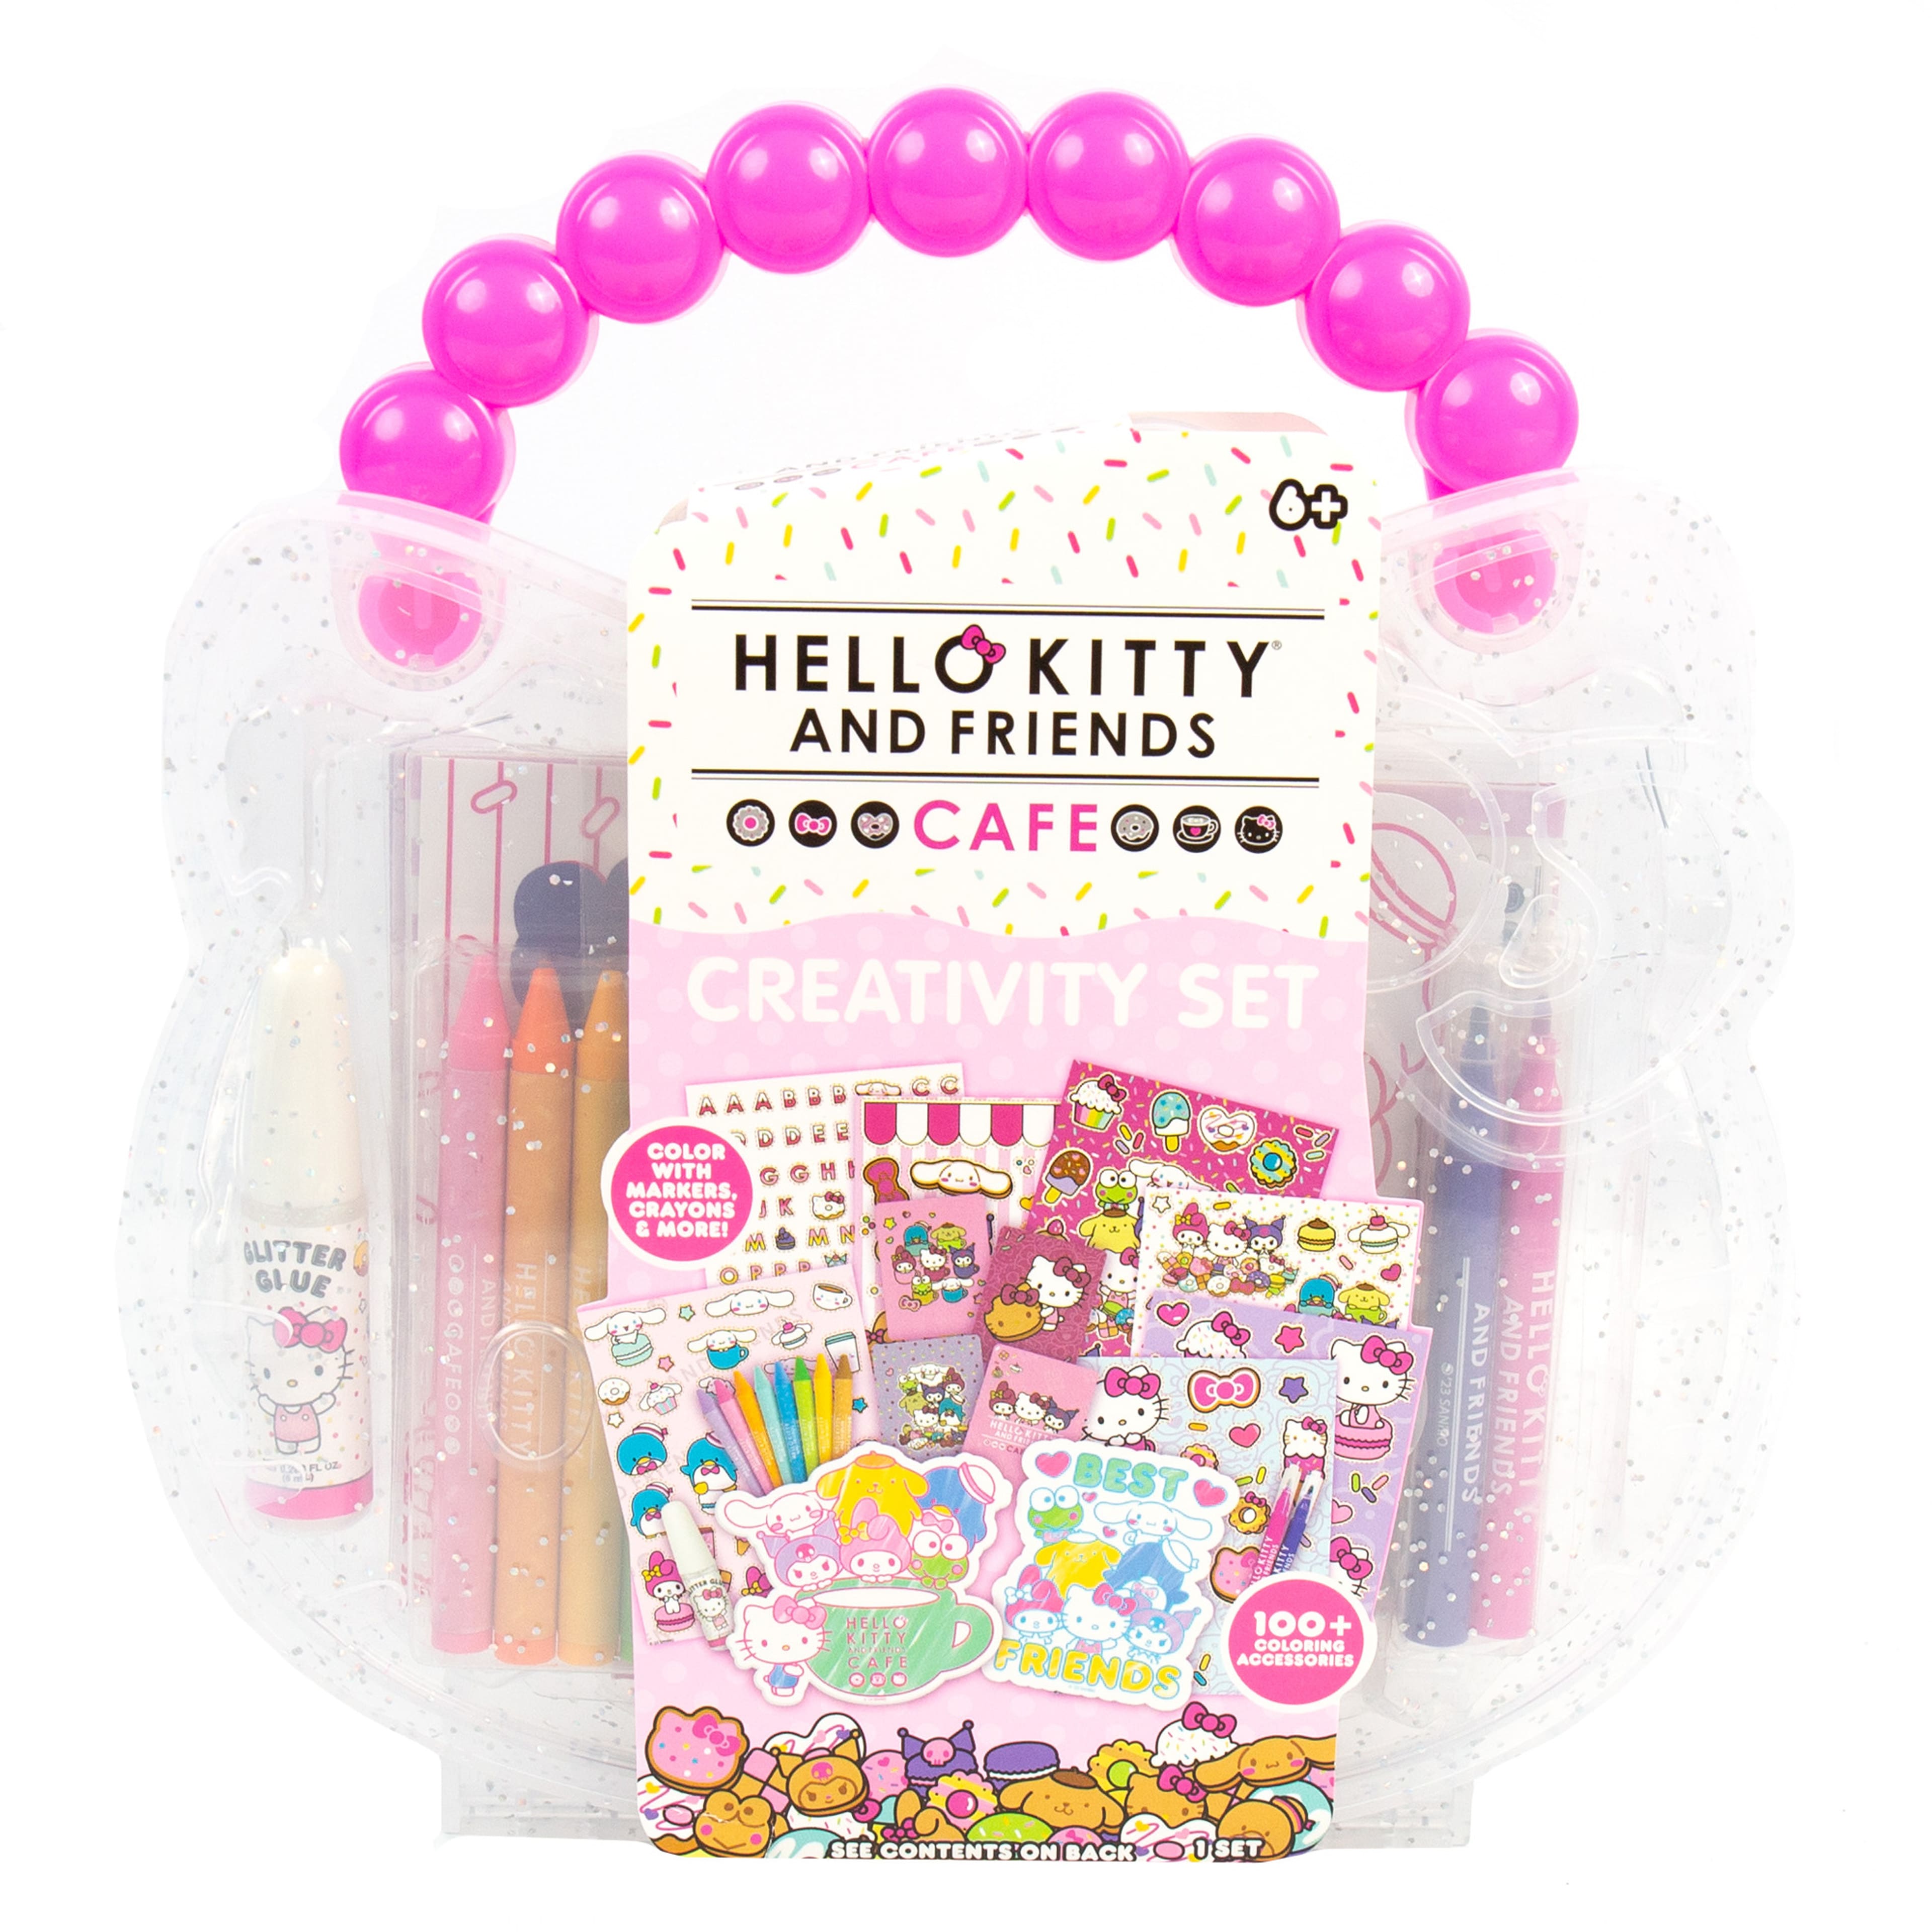 Hello Kitty, Hello Color! (Hello Kitty and Friends)